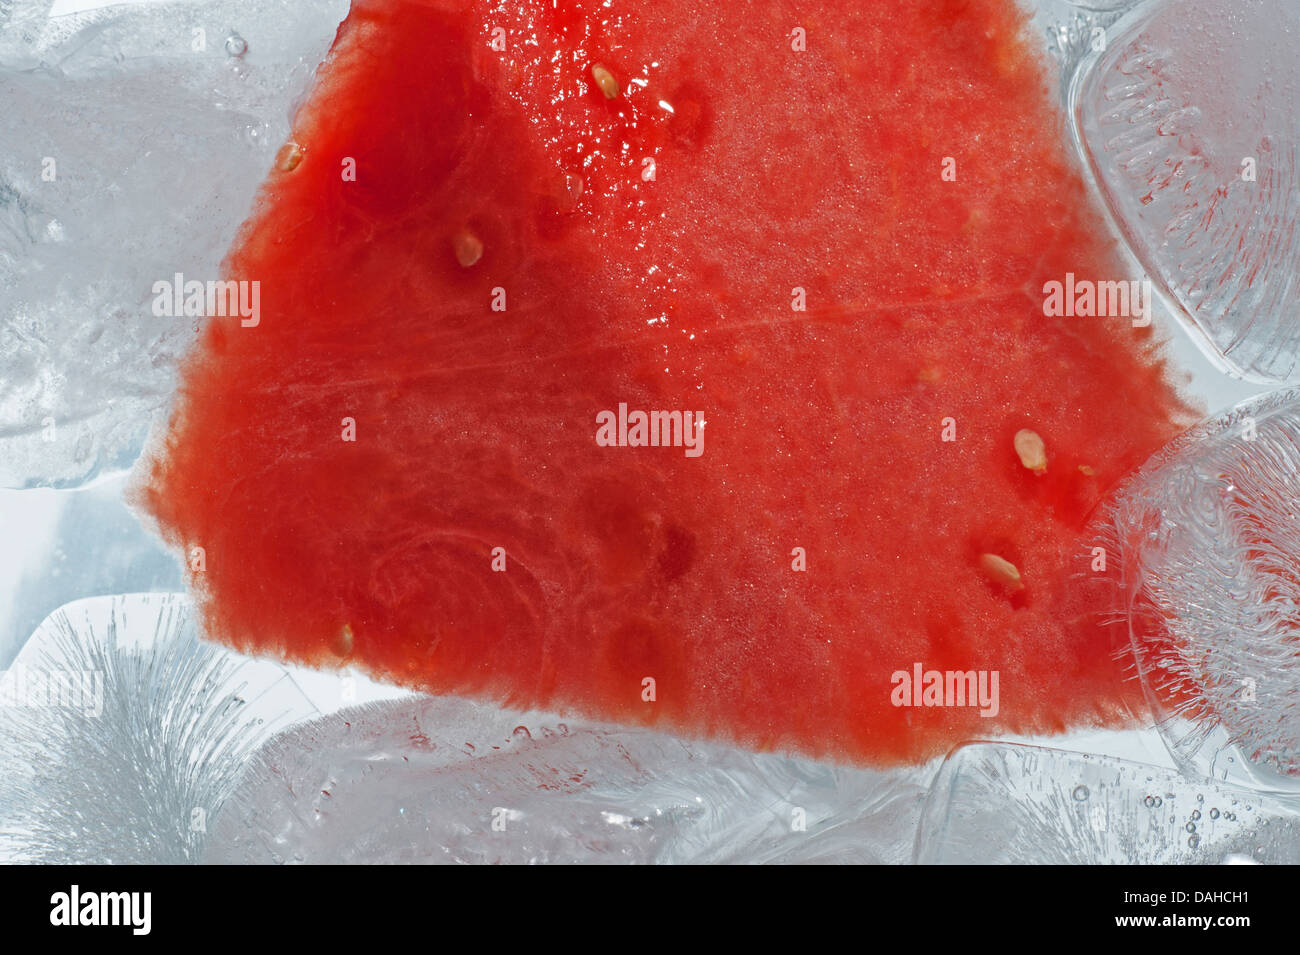 Watermelon - red watermelon in the ice Stock Photo